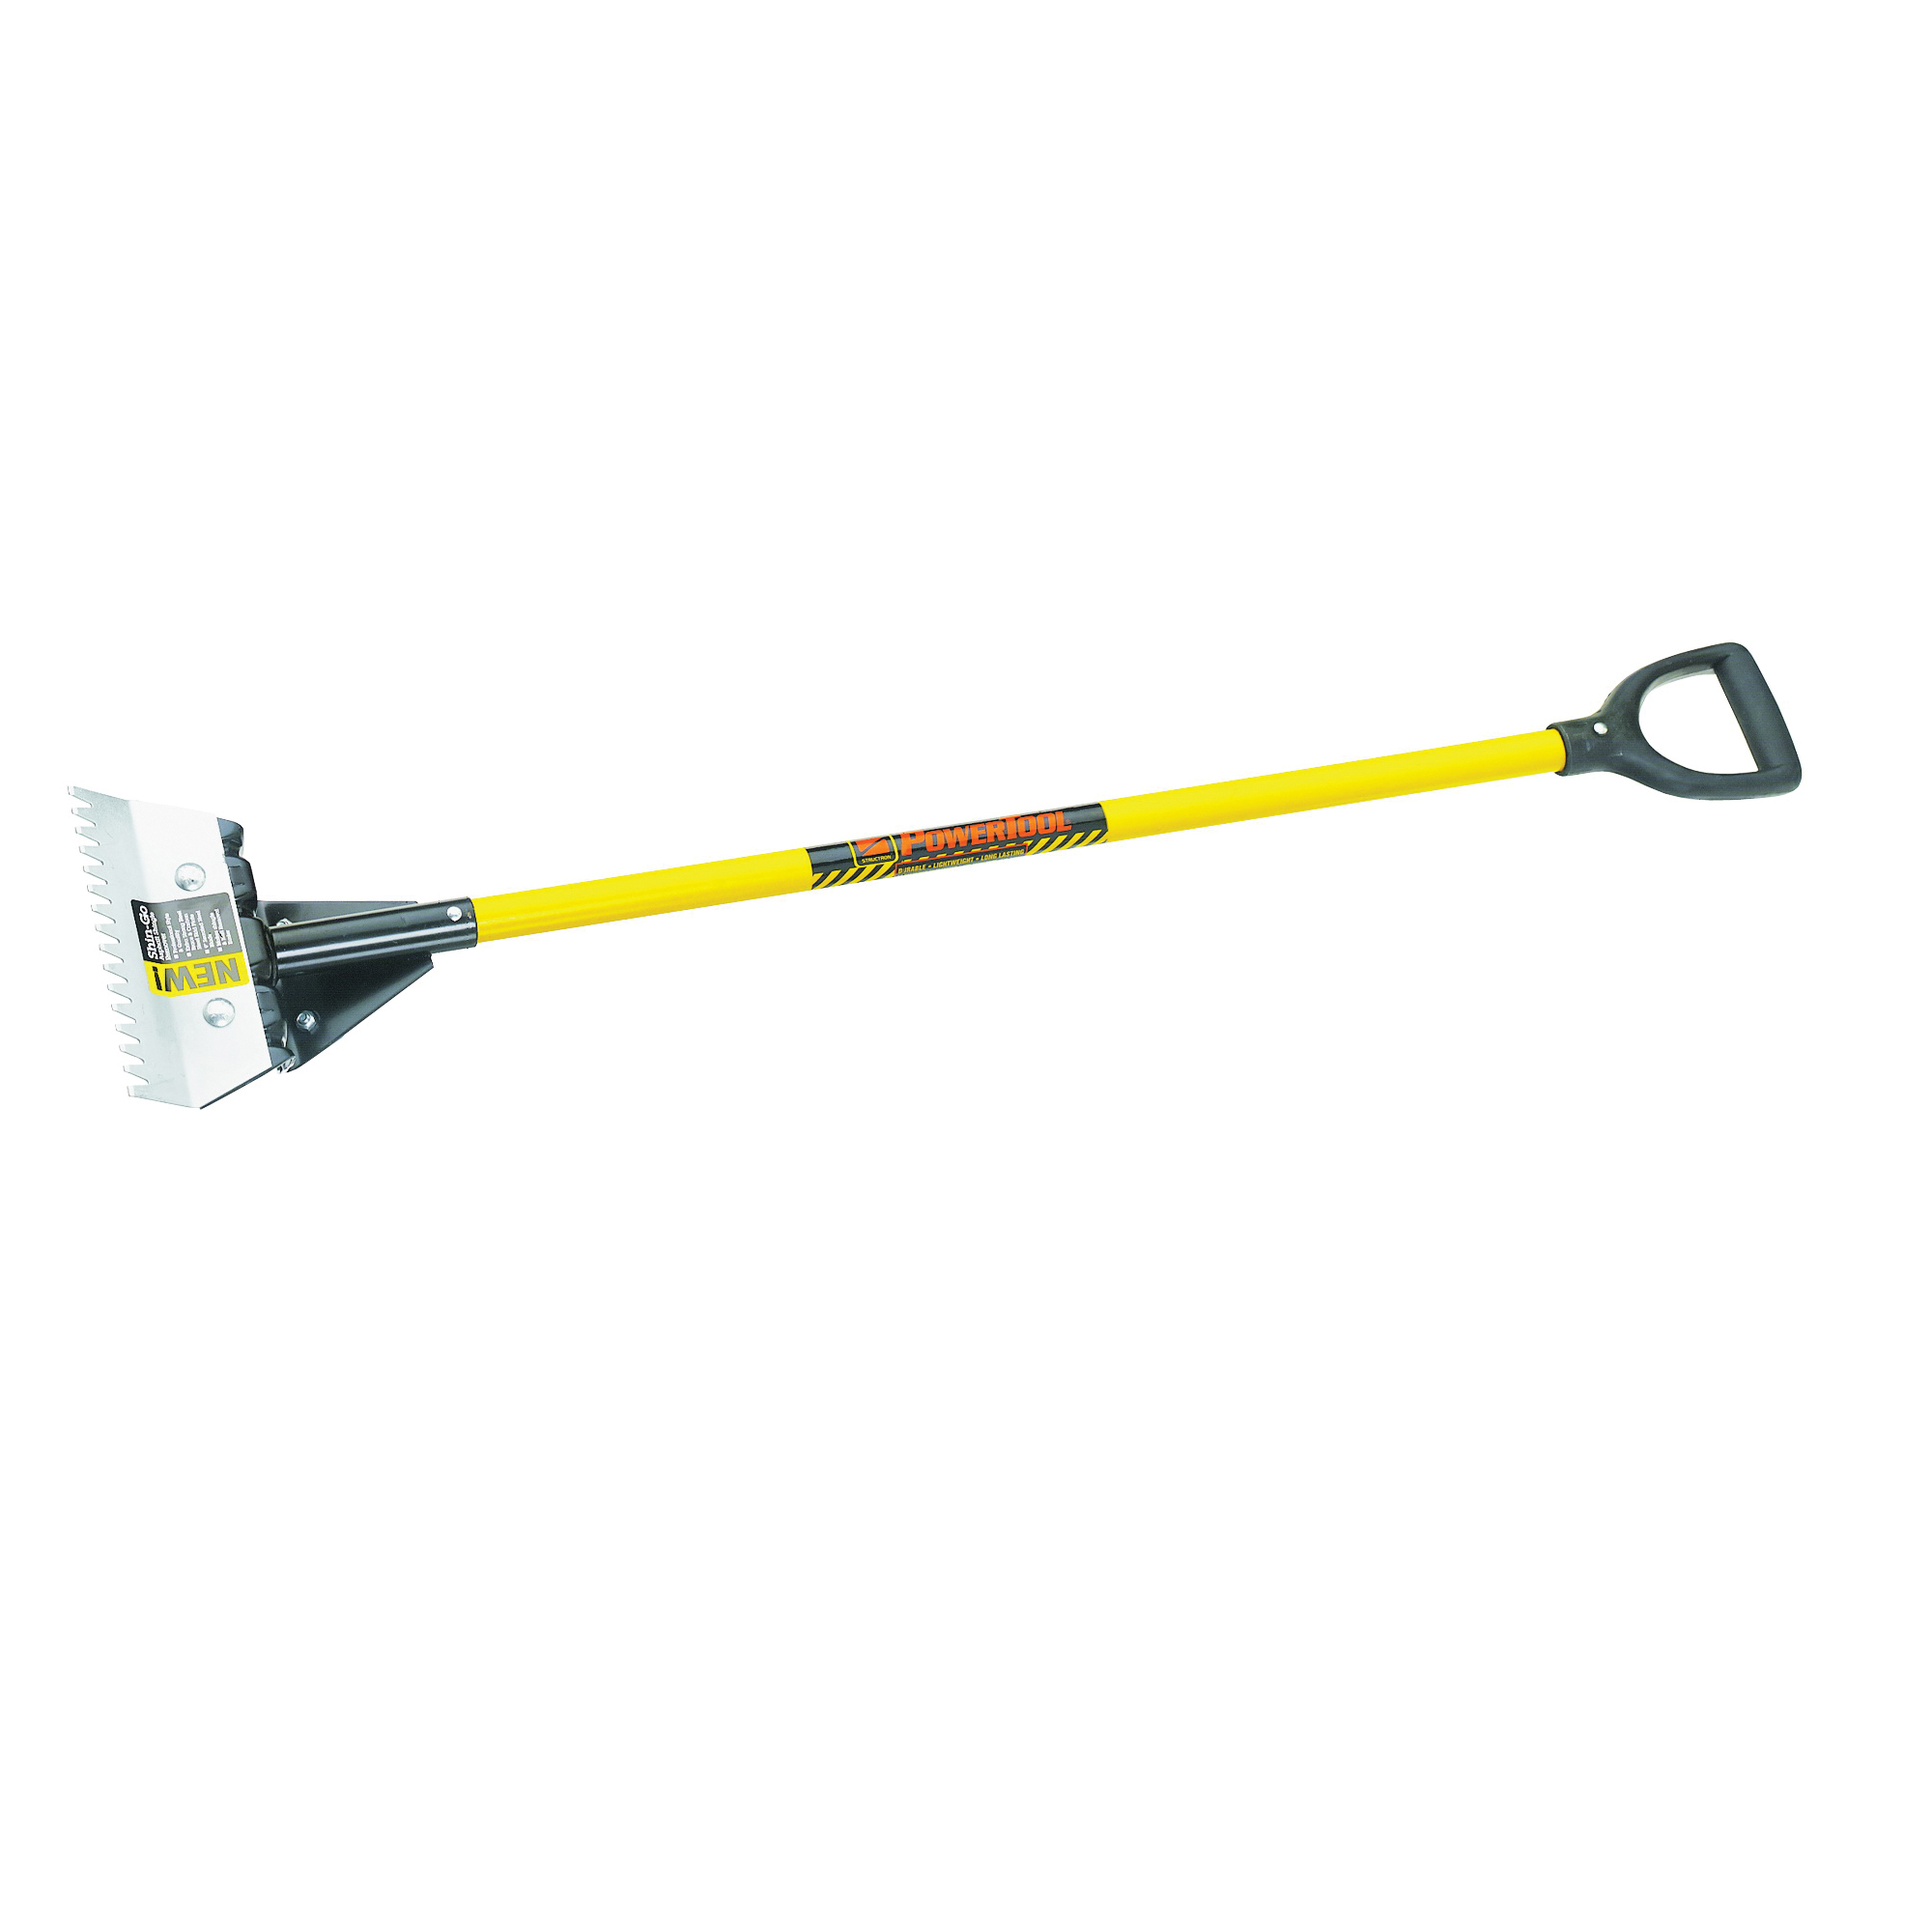 S600 Power Series 49749 Shingle Remover Shovel, Carbon Steel Blade, Steel Head, D-Shaped Handle, 48 in OAL